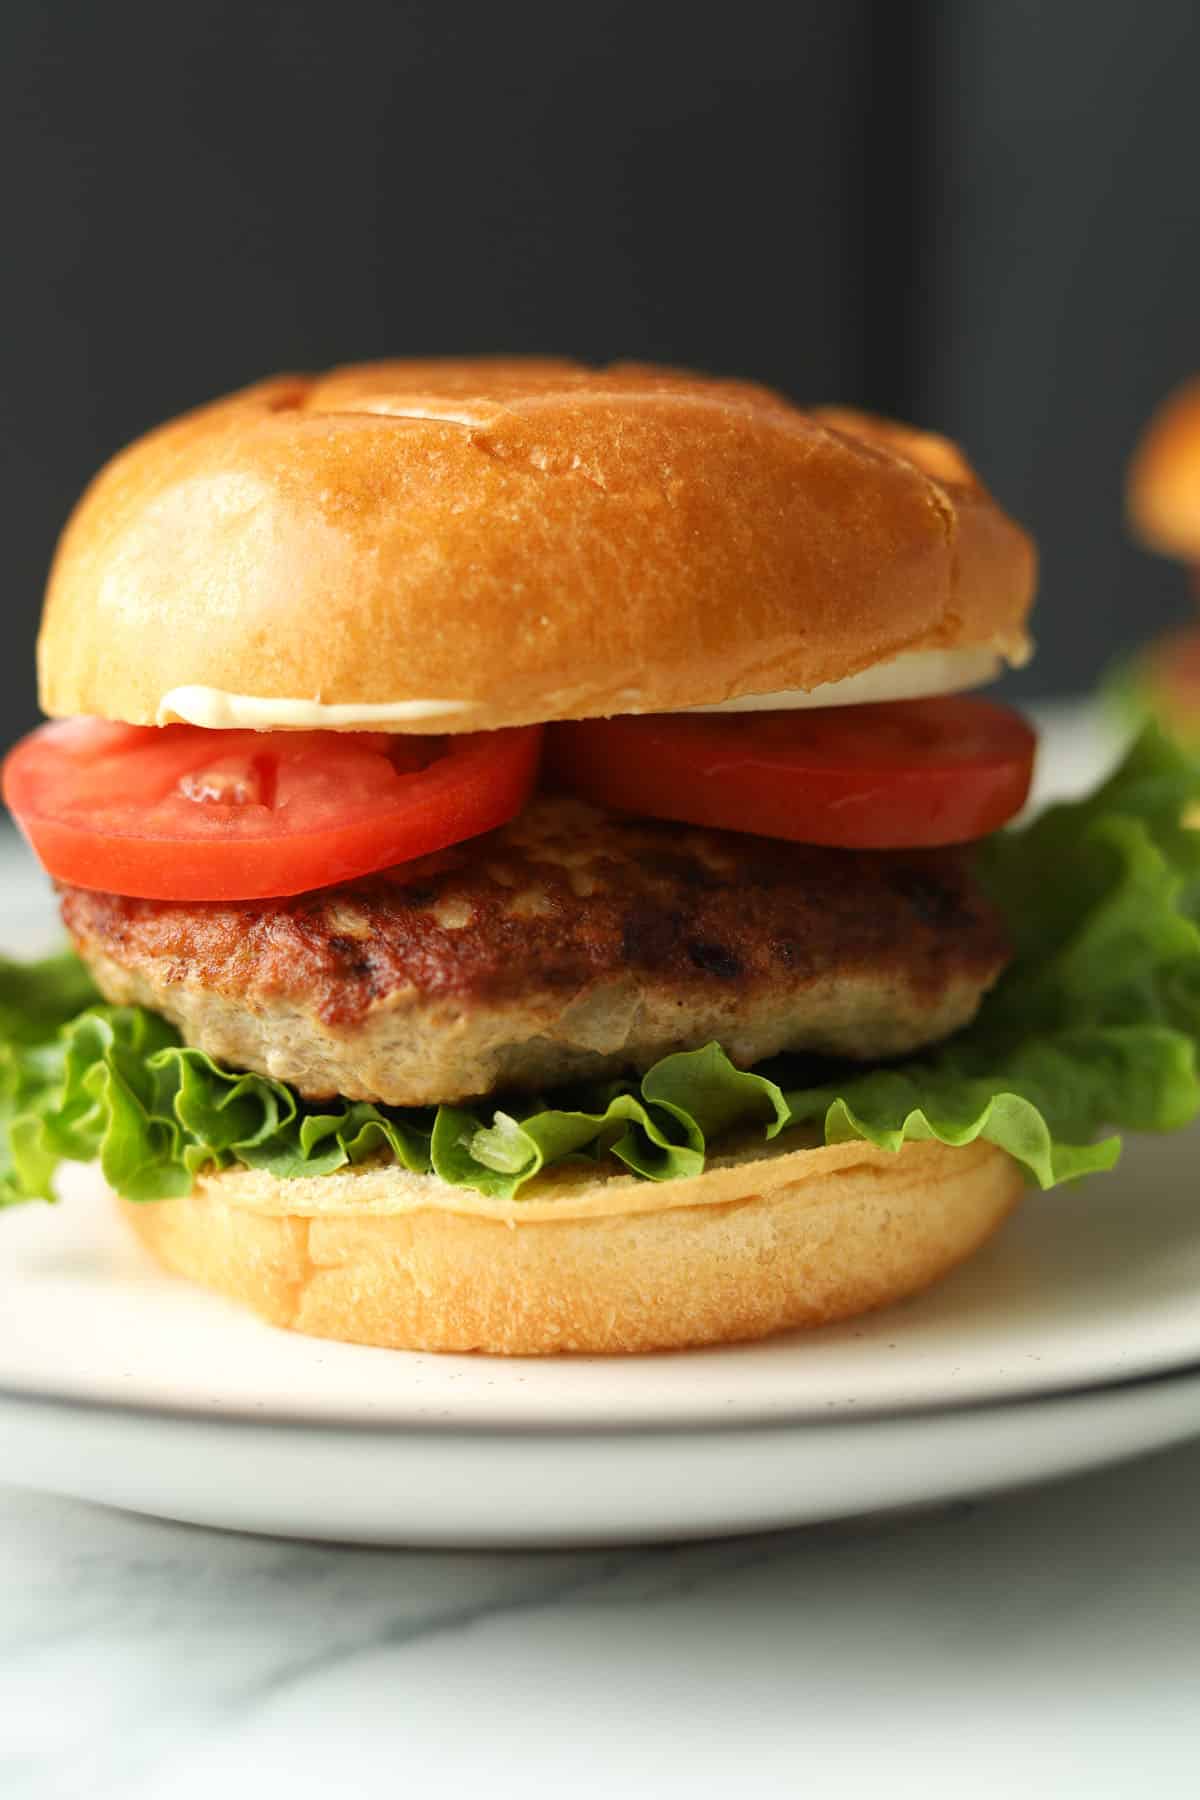 Hamburger with tomatoes and lettuce on a plate.